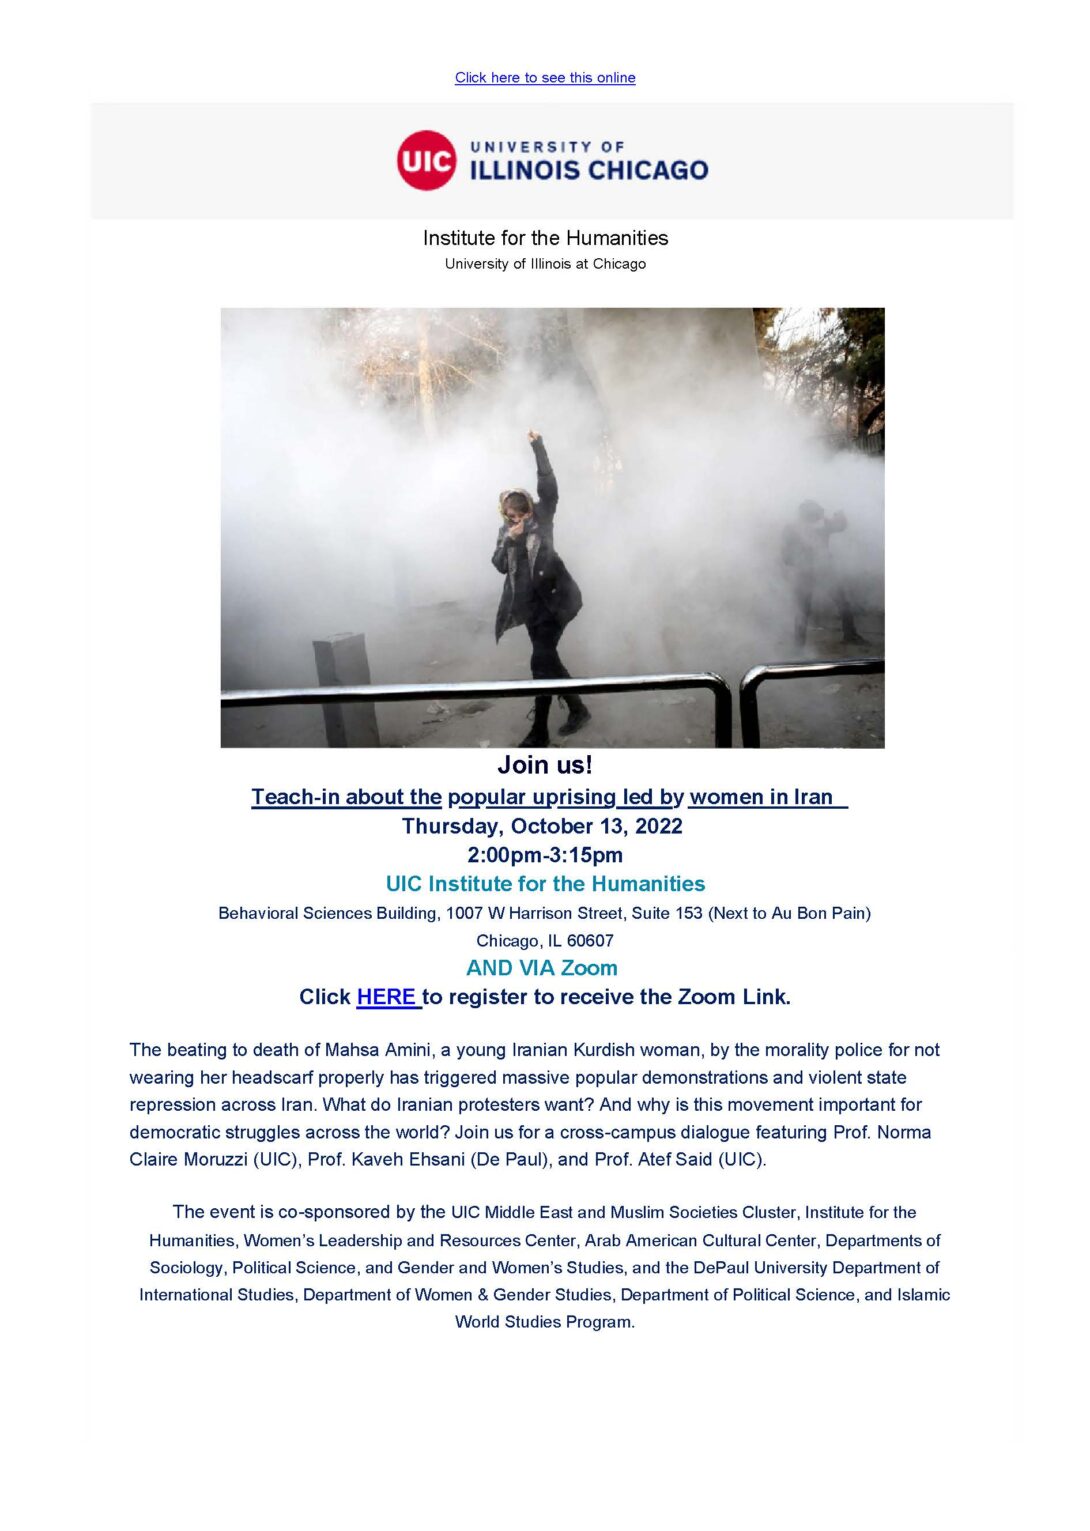 White event flier with a photograph in the center showing a woman in the midst of tear gas raising her fist and covering her mouth with a scarf. Blue text provides the event title, description, time, location, and registration details.